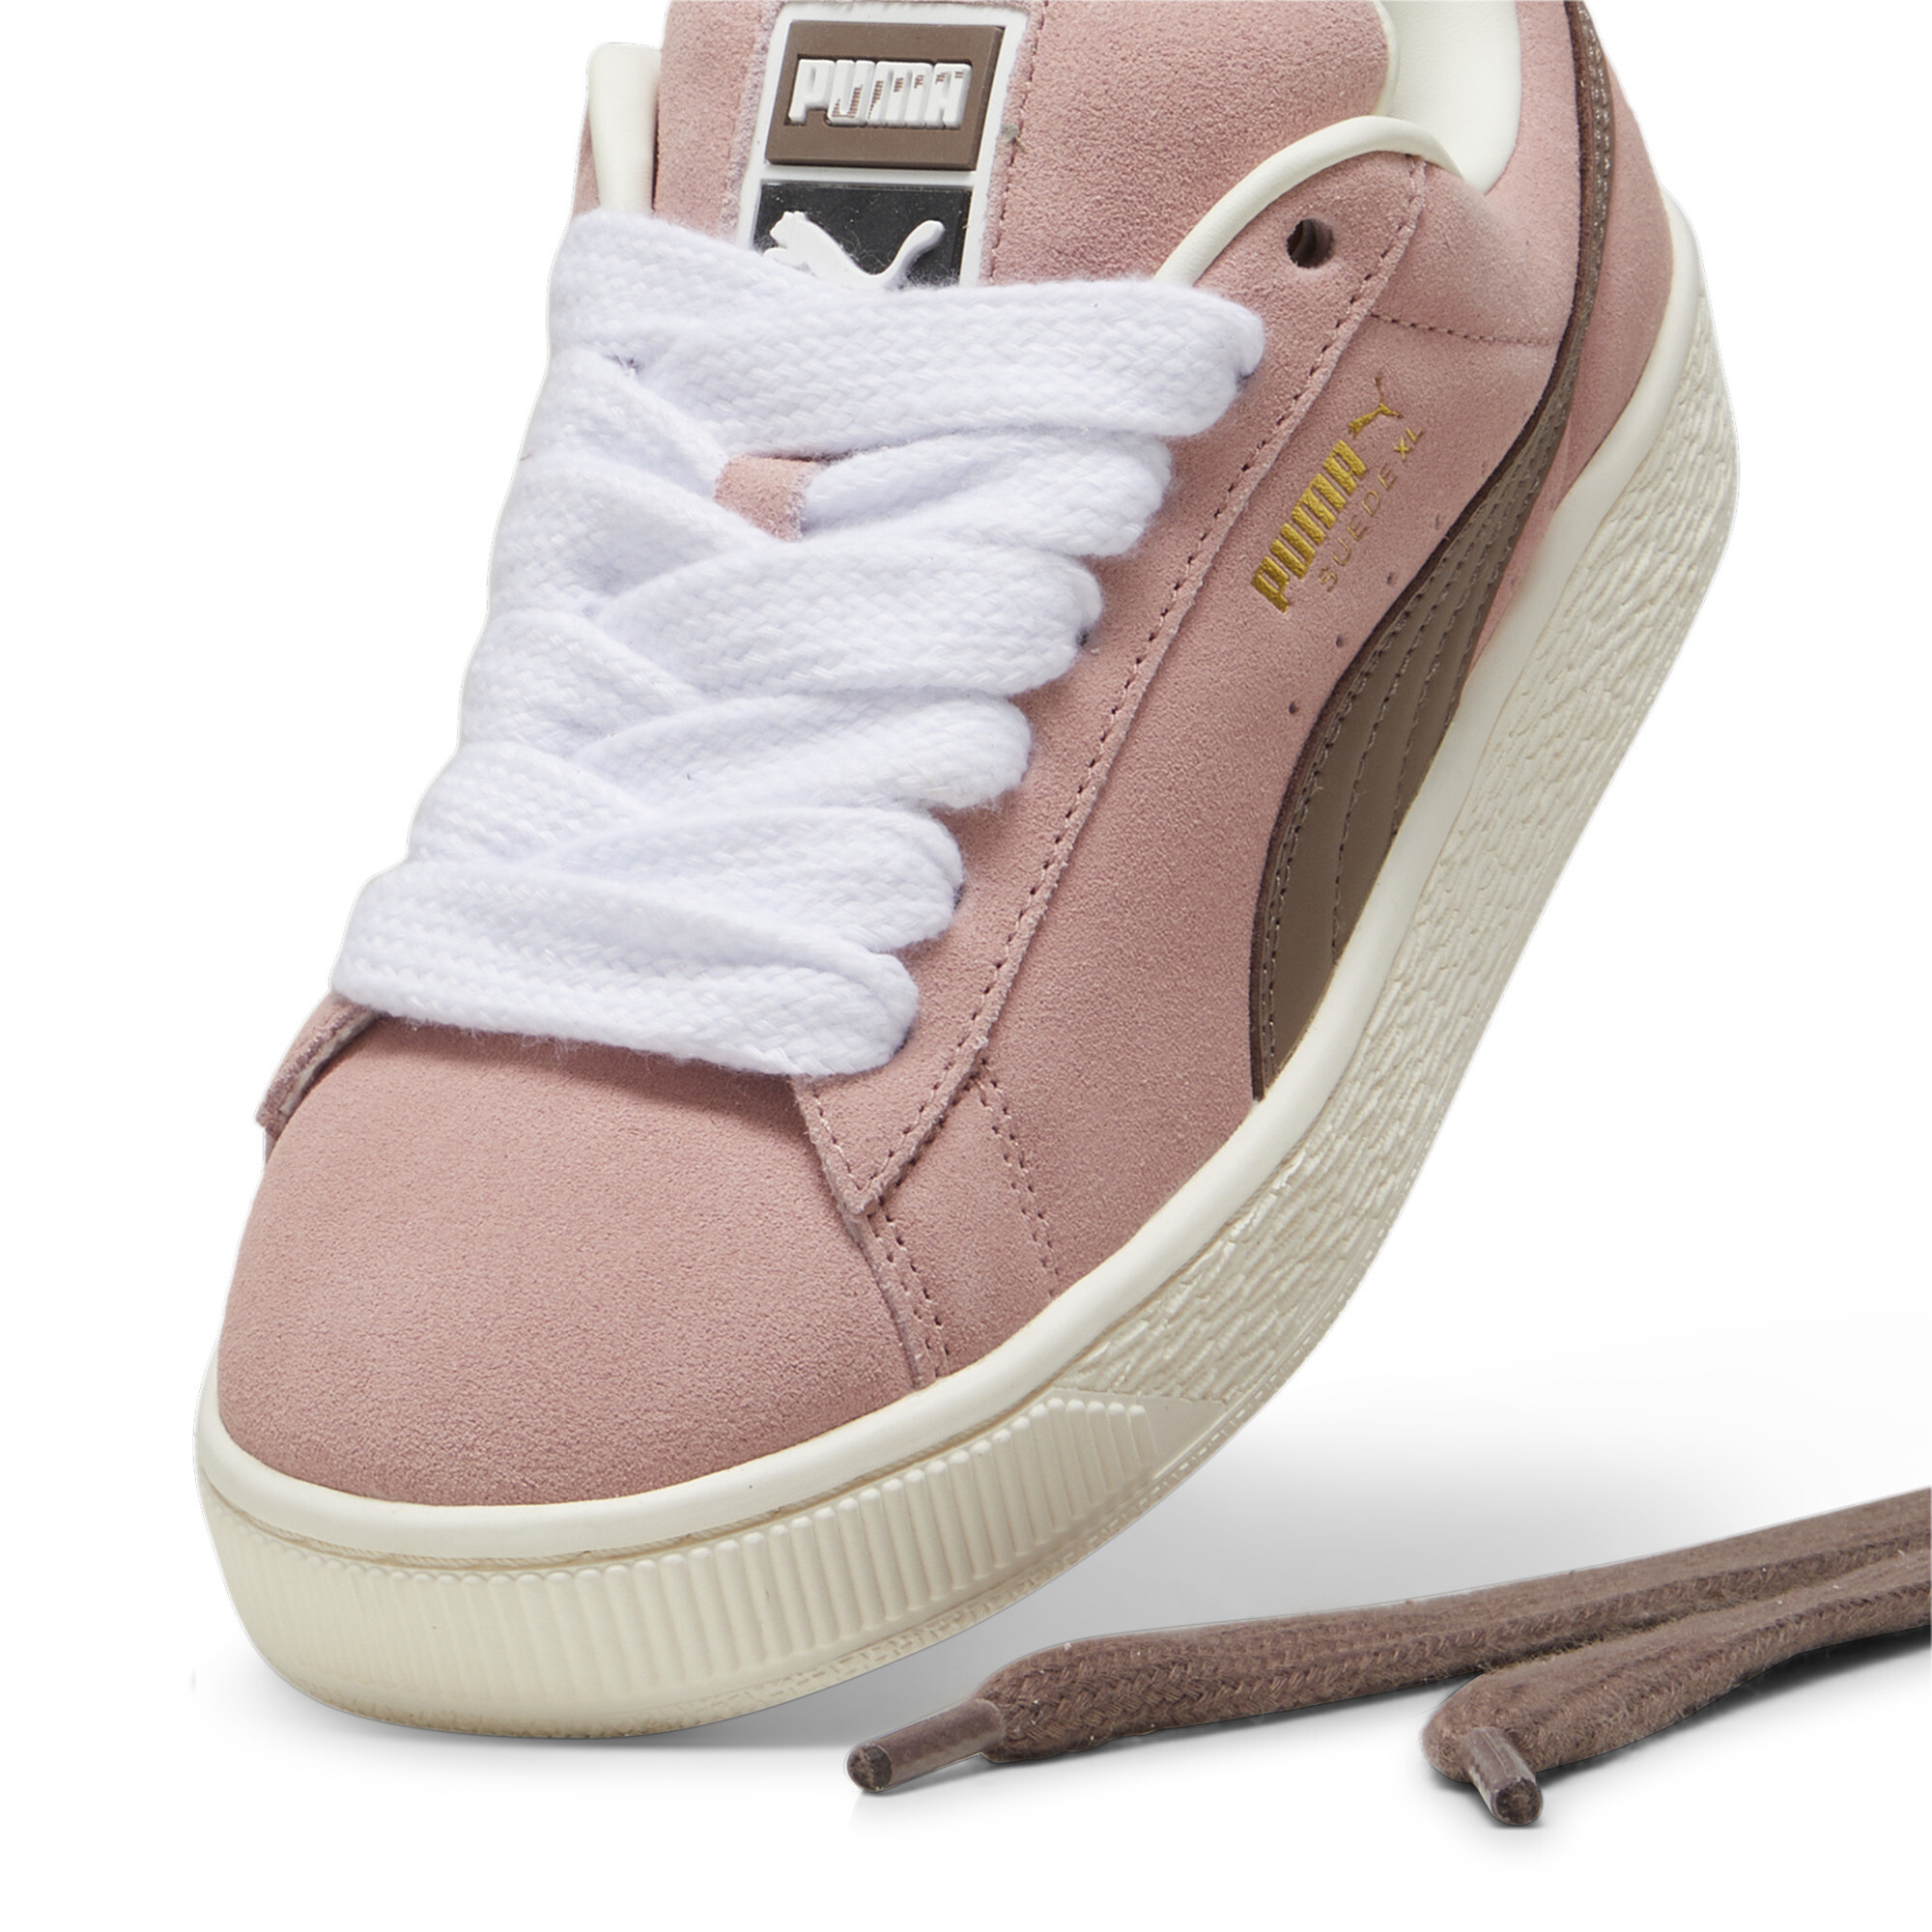 Puma Suede XL Sneakers Unisex, Pink, Size 44.5, Shoes